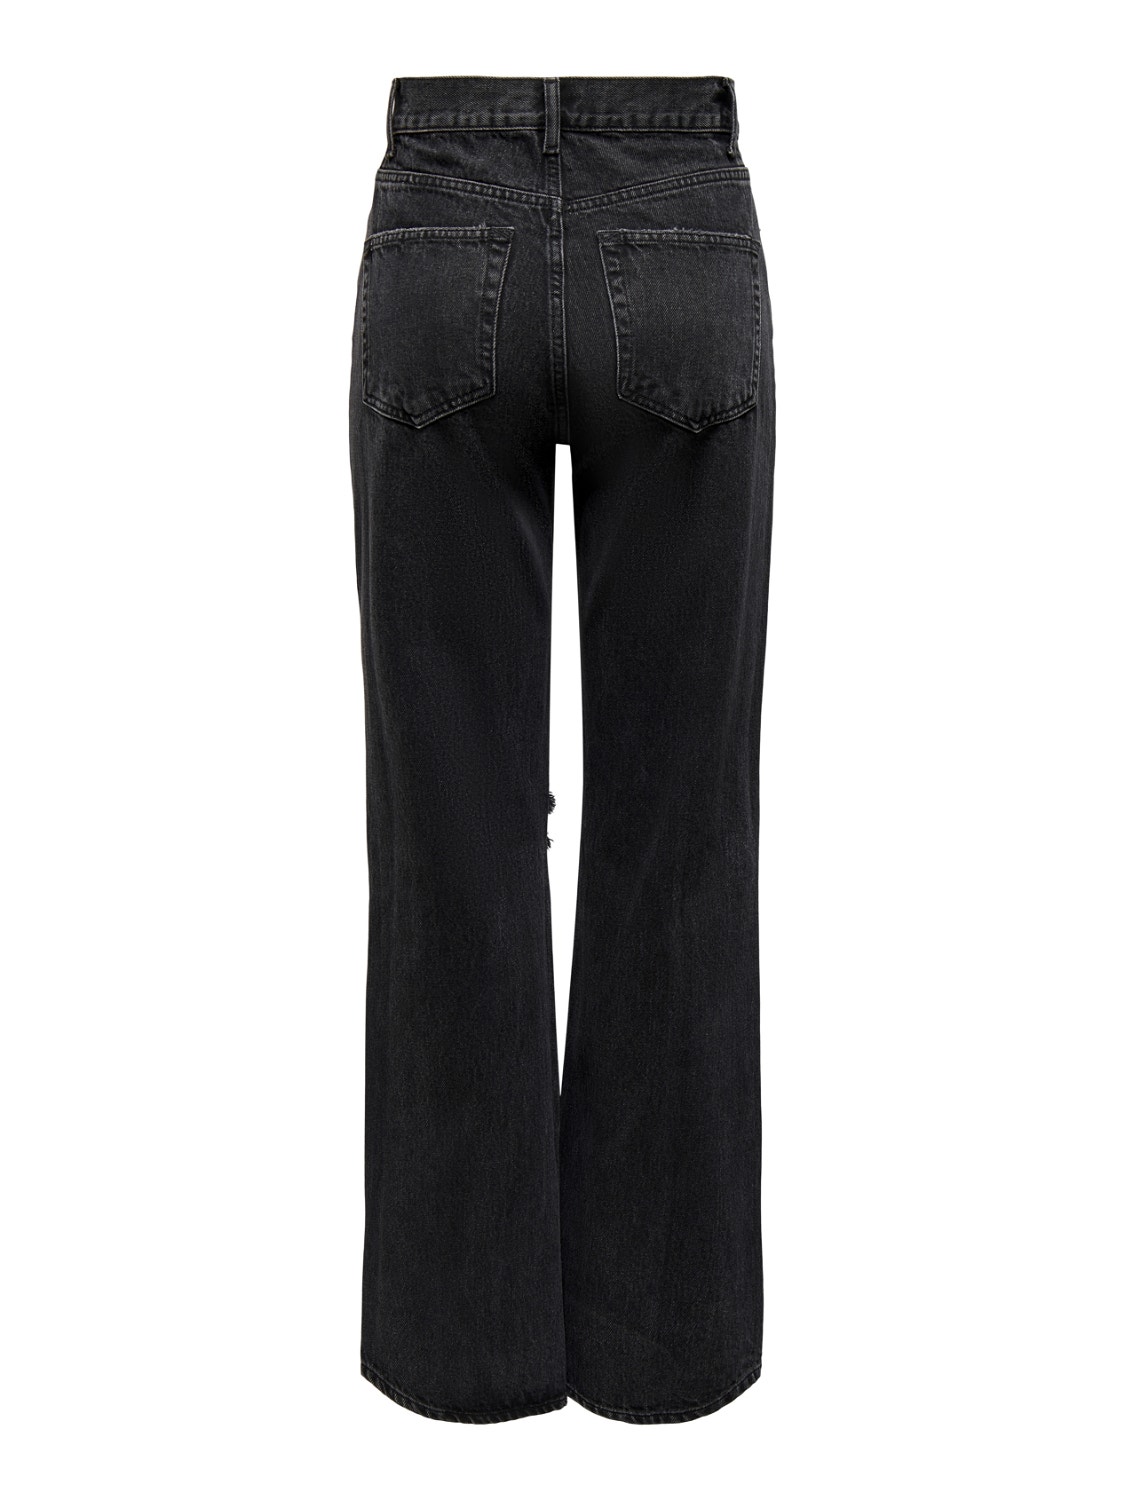 ONLY Jeans Wide Leg Fit -Washed Black - 15263461